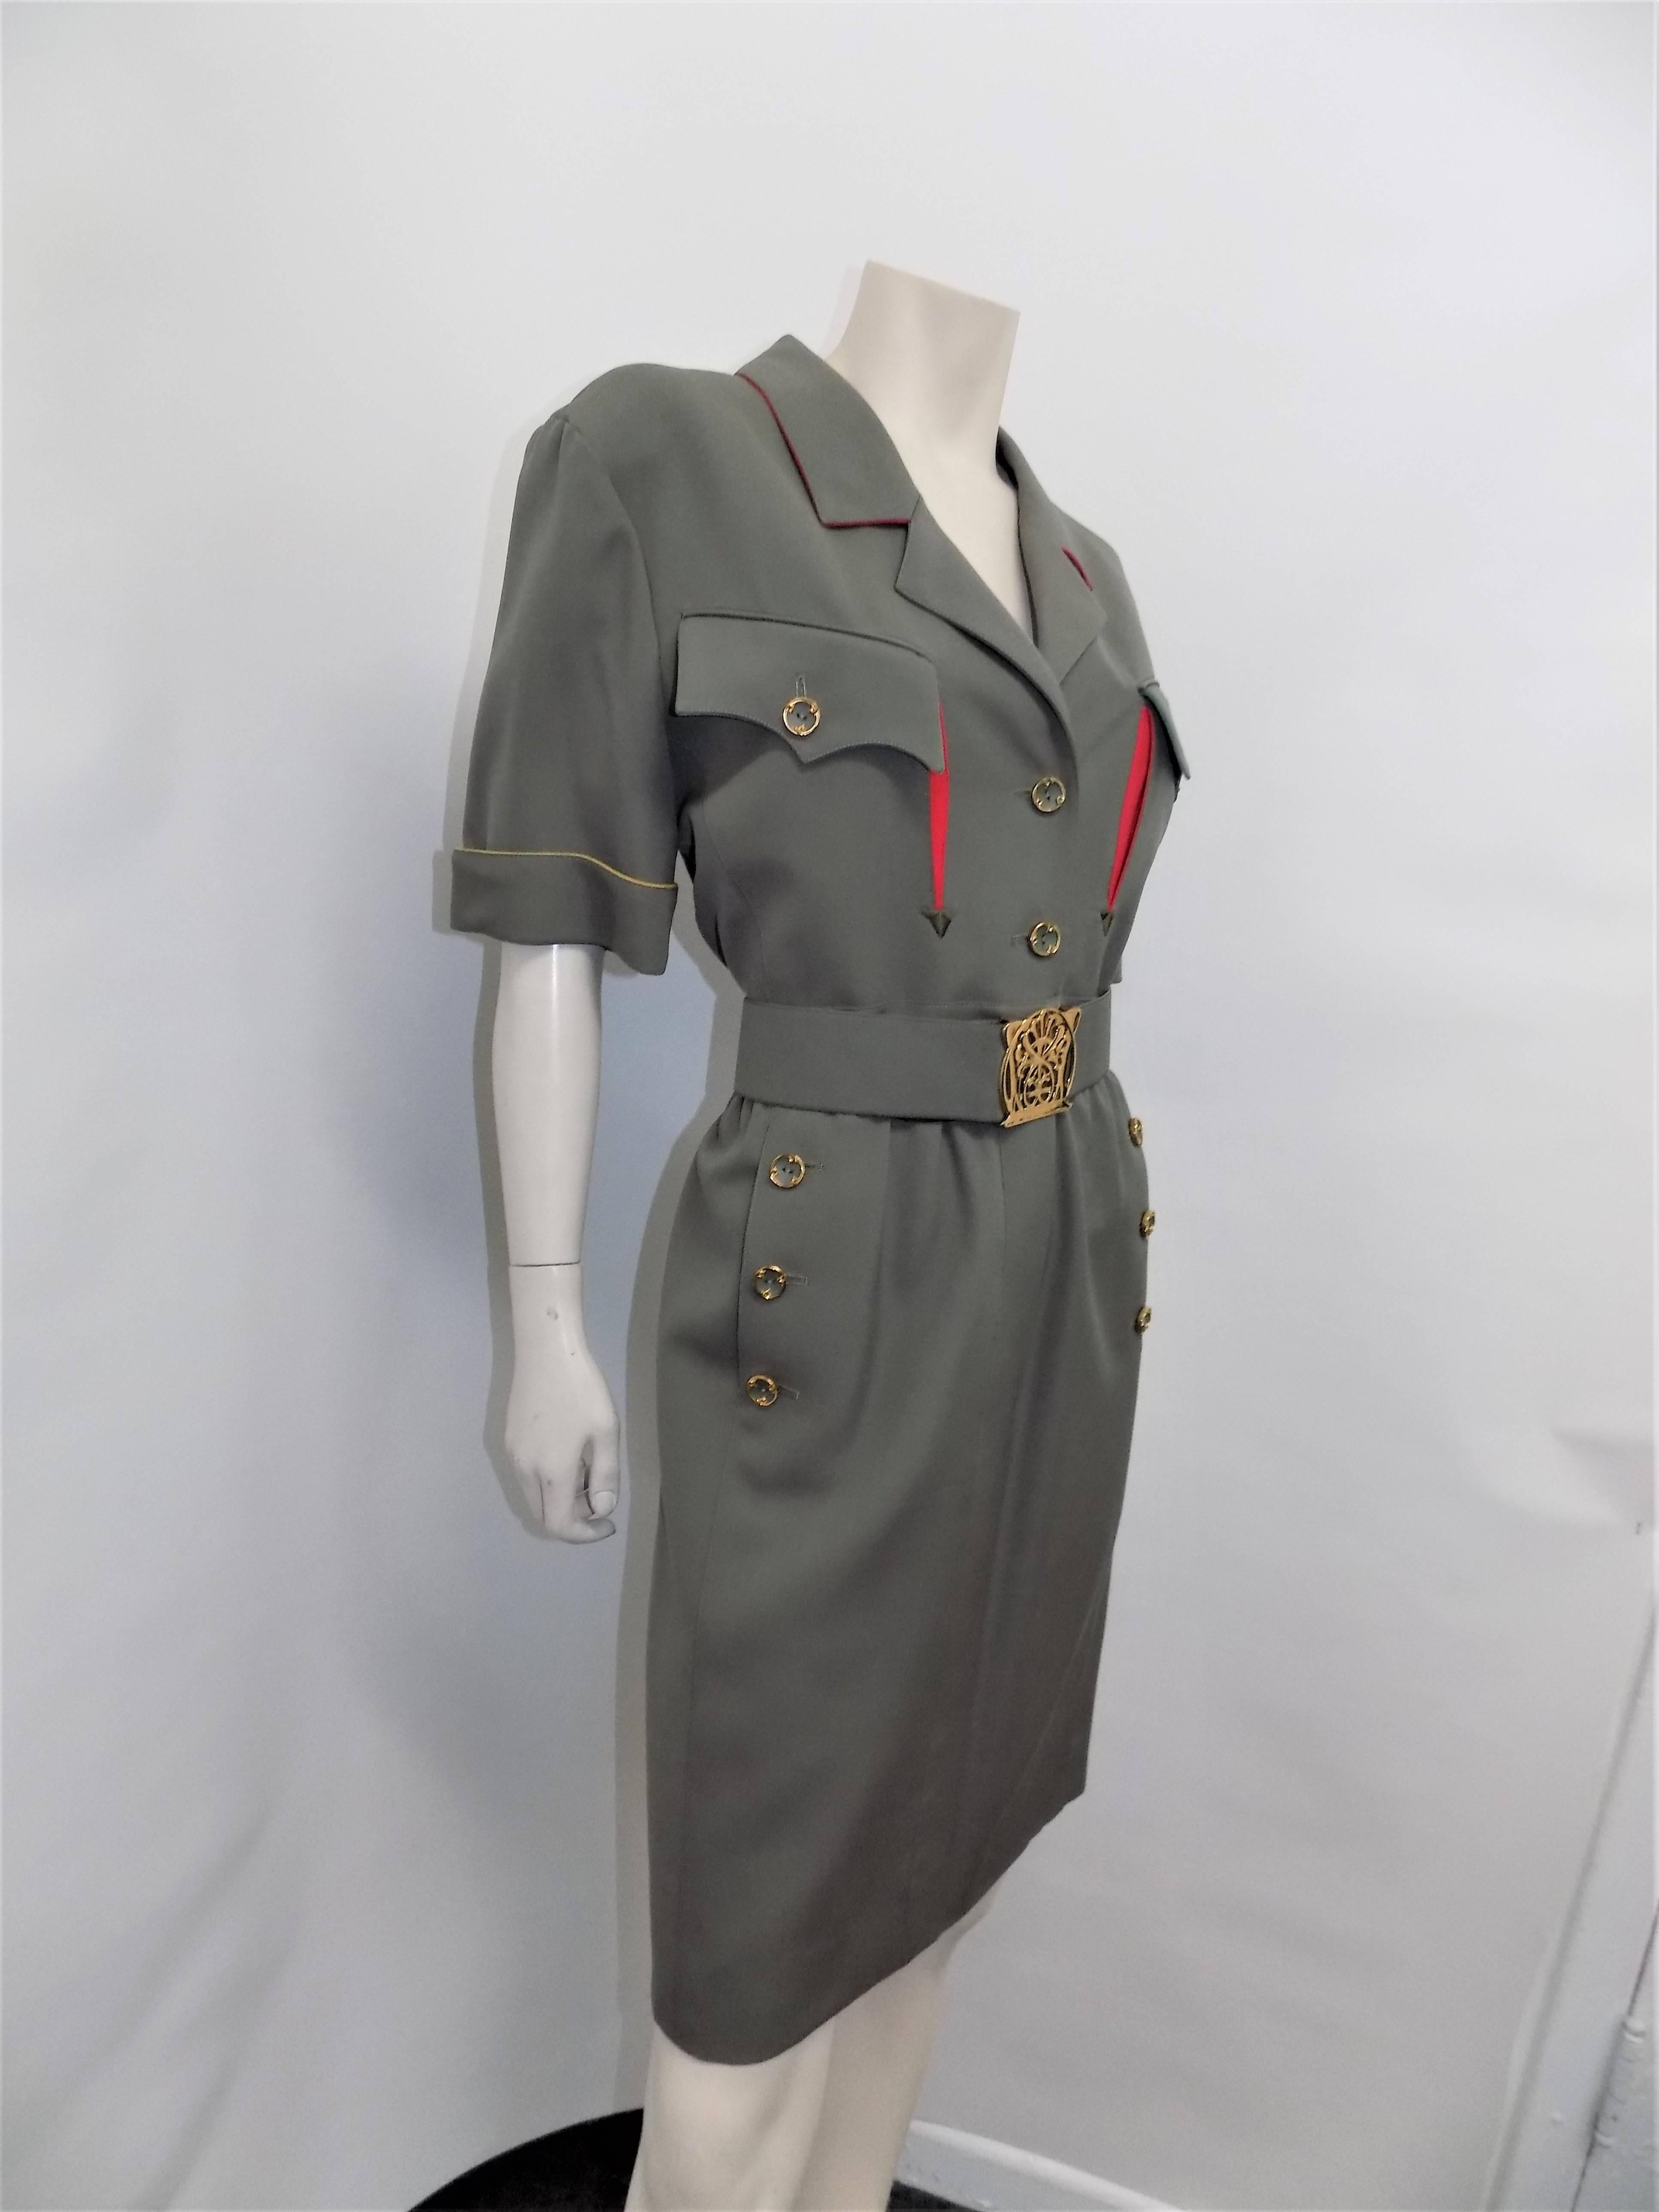 Never worn must have spectacular military style vintage Karl Lagerfeld dress. Light  wool gabardine fully lined. Dress feature wide belt with gold tone carved out logo buckle., amazing custom made buttons, and multi color underlined pocket flaps ,